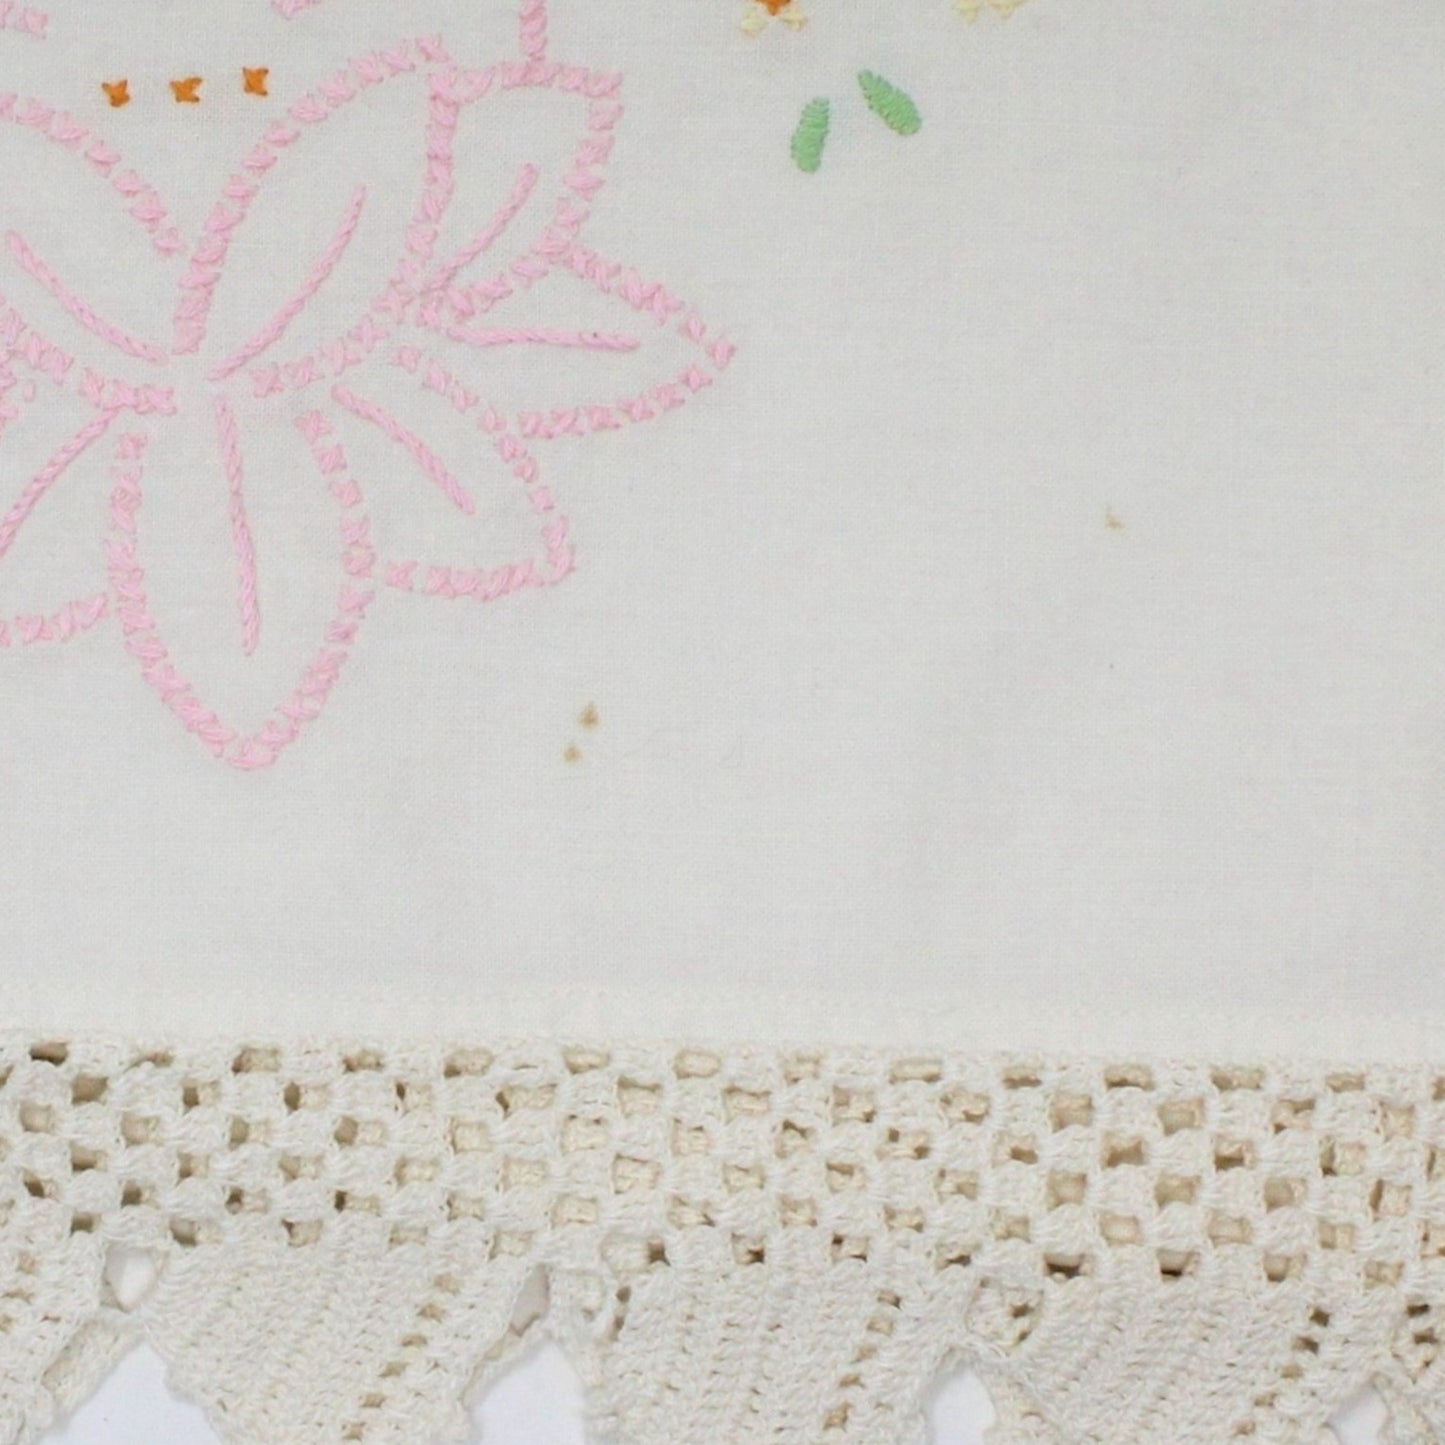 Pillow Cases, Hand Embroidered Pink Lotus Flowers with Crochet Border, Vintage